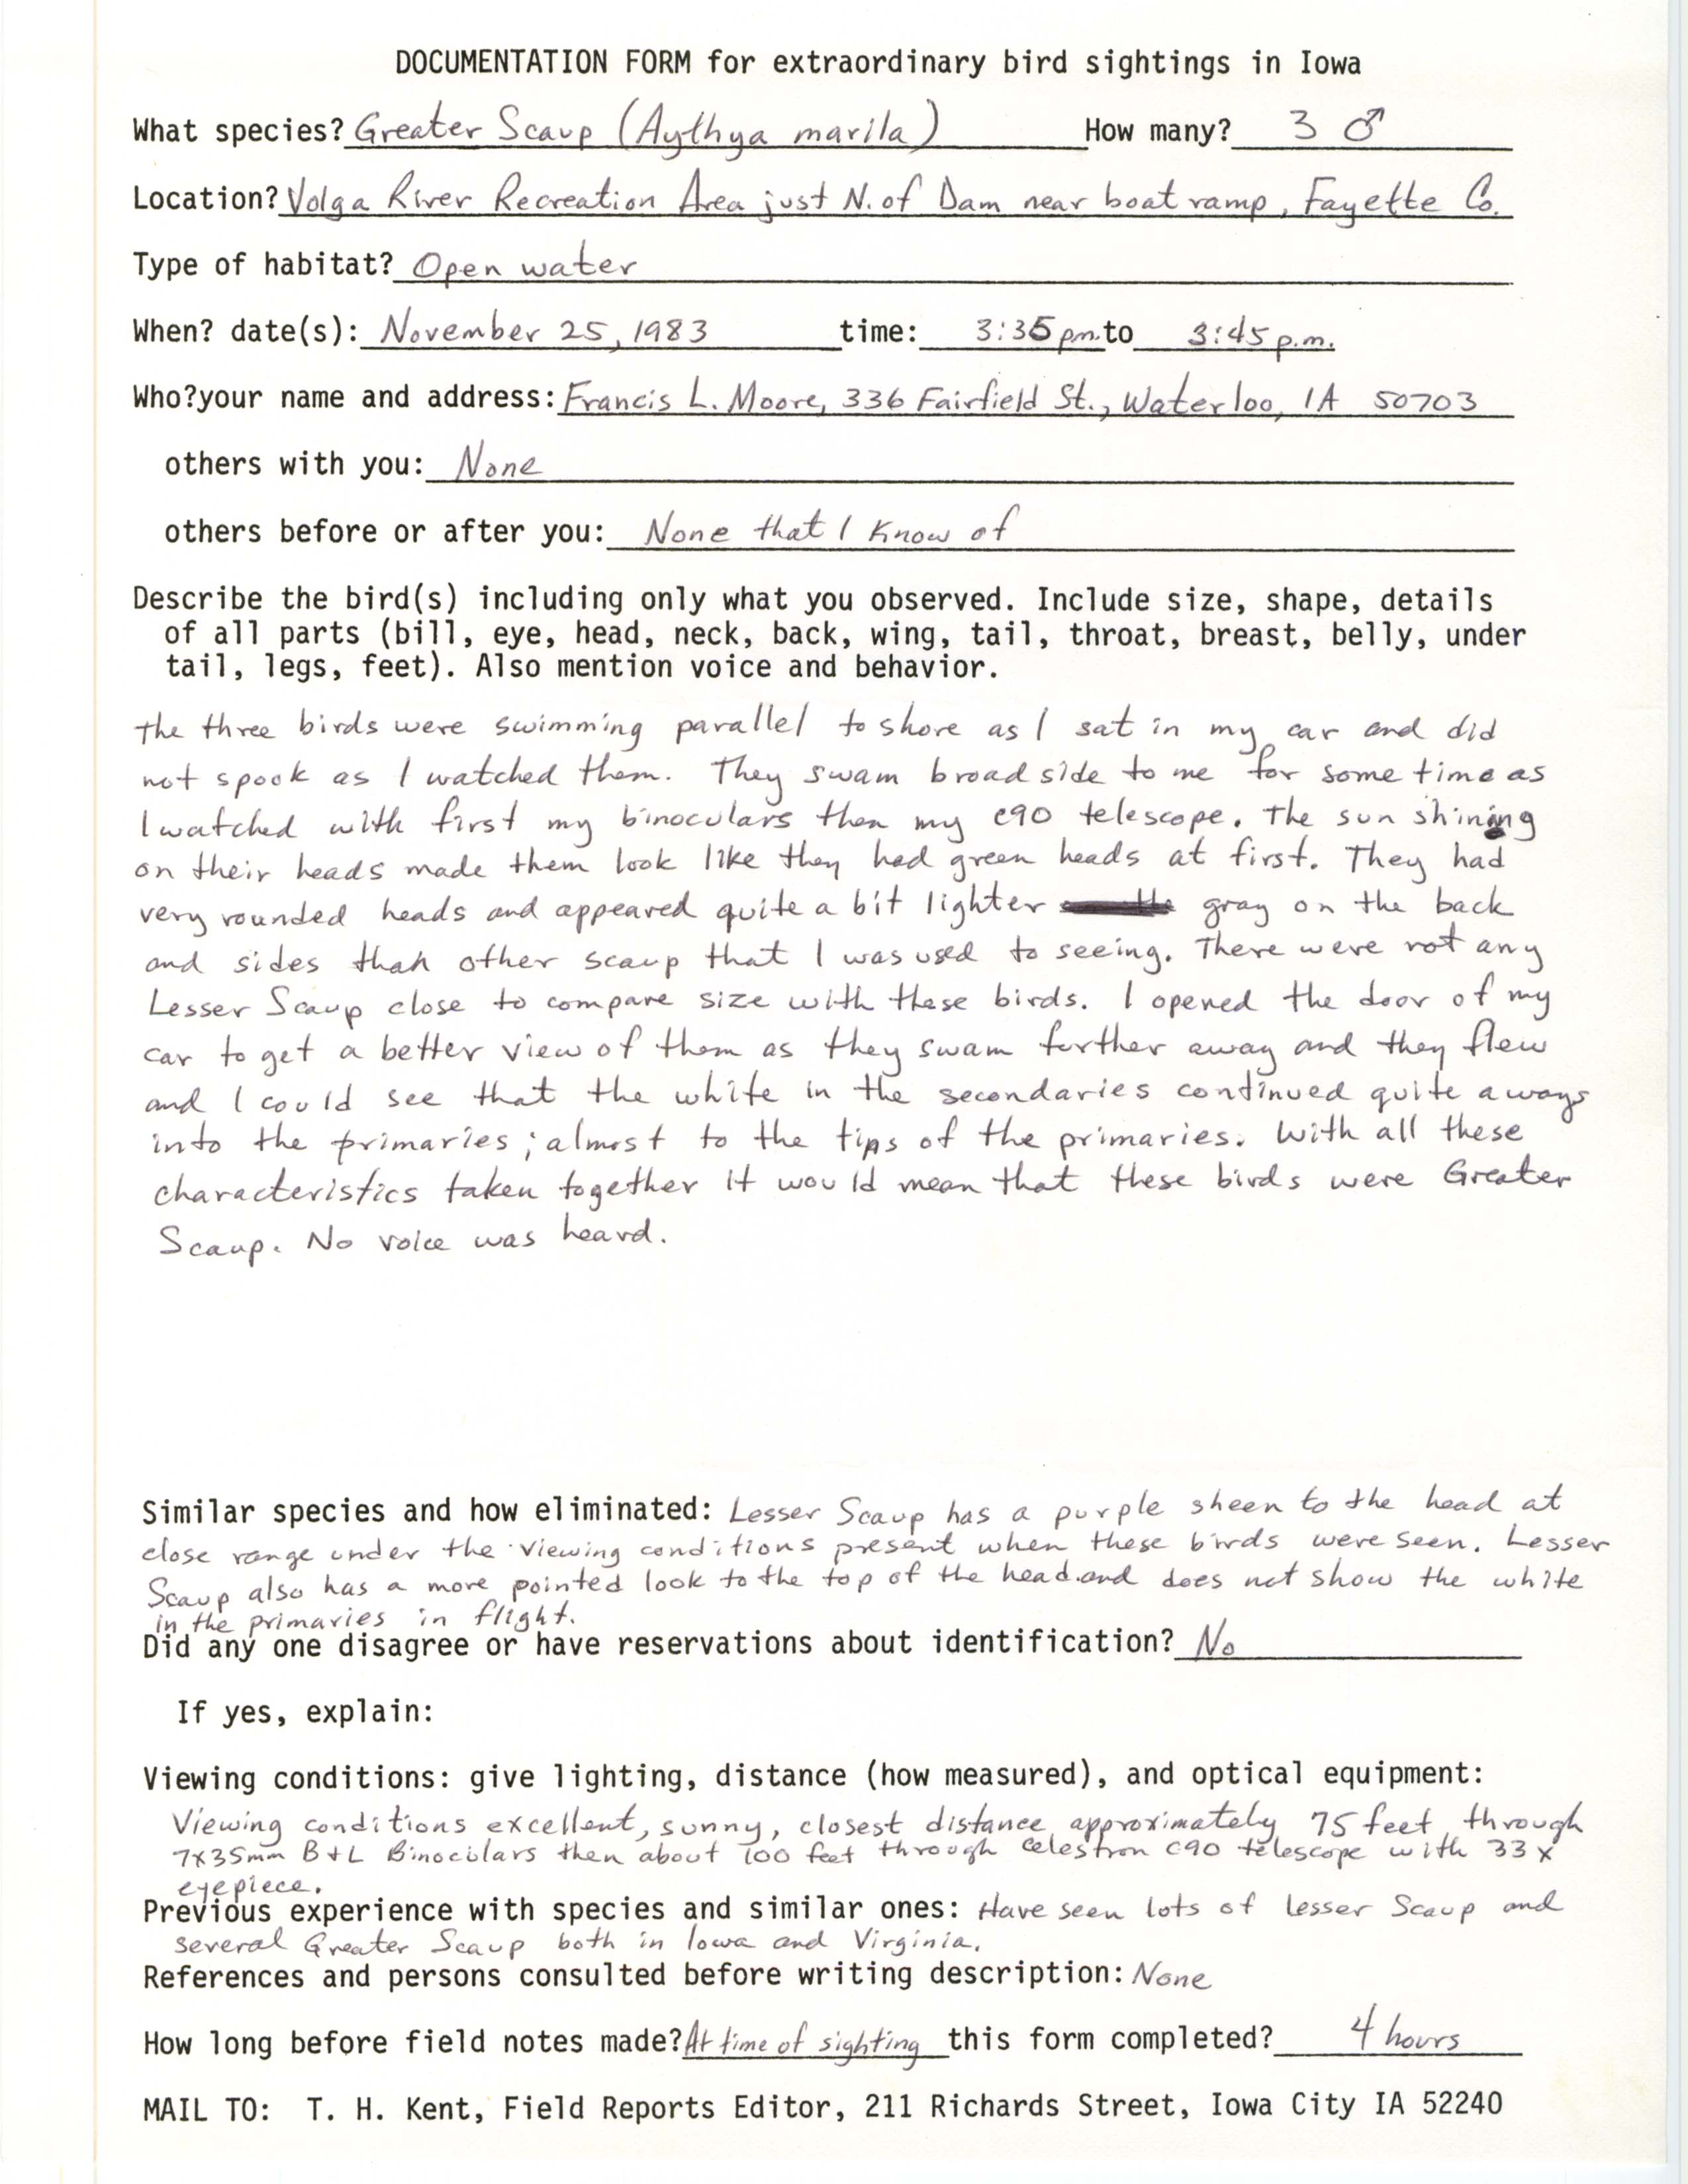 Rare bird documentation form for Greater Scaup at Volga River Recreation Area, 1983